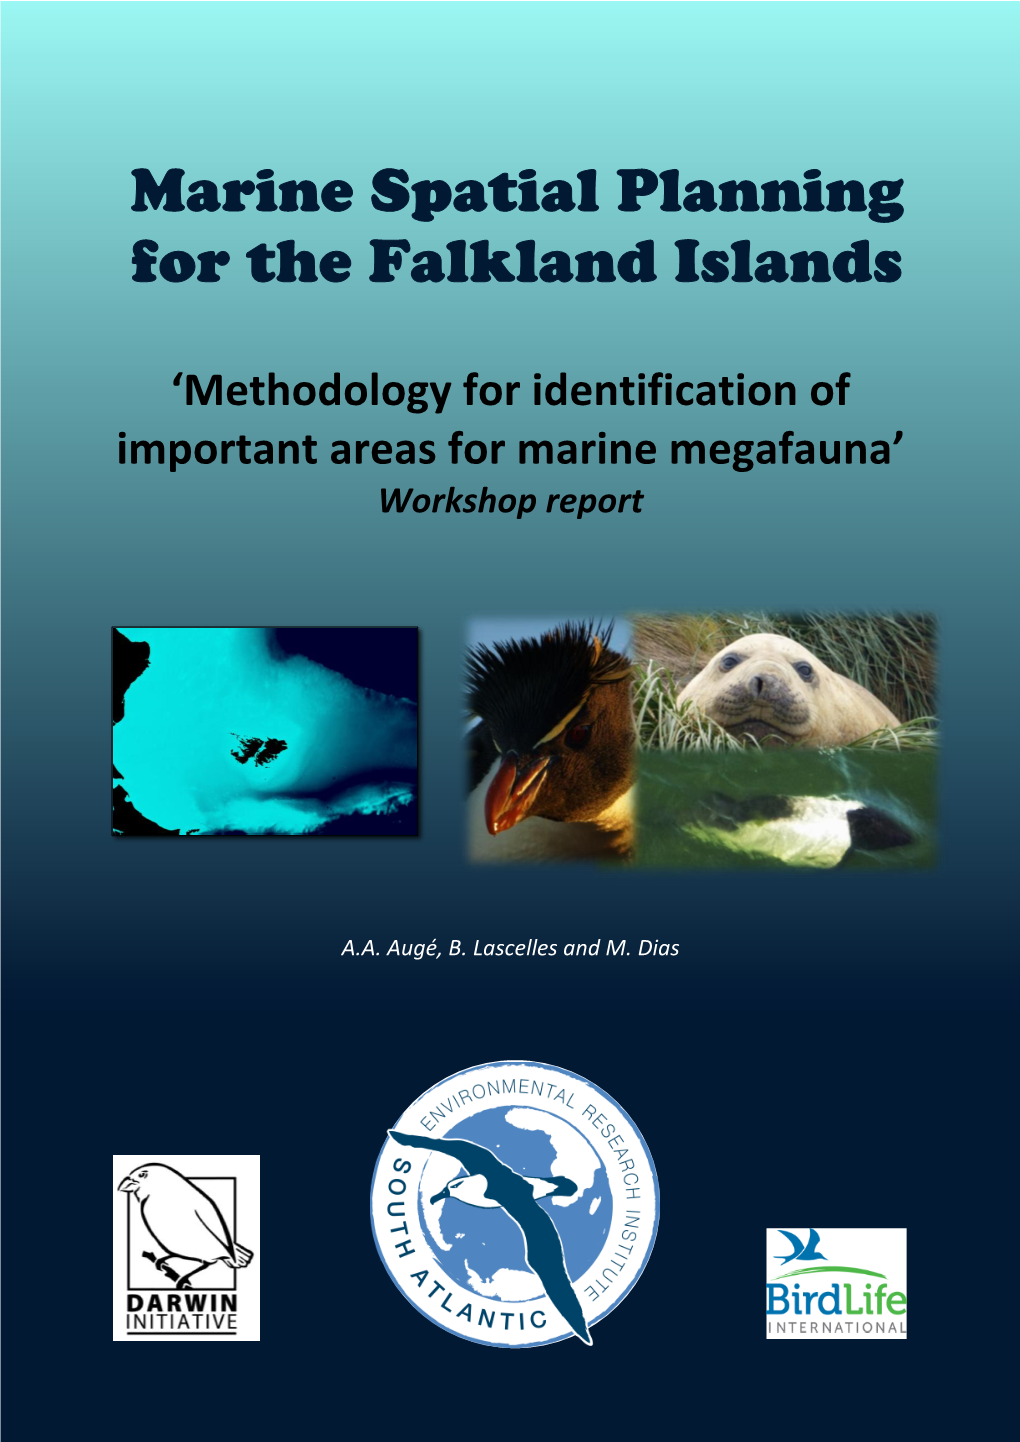 Marine Spatial Planning for the Falkland Islands